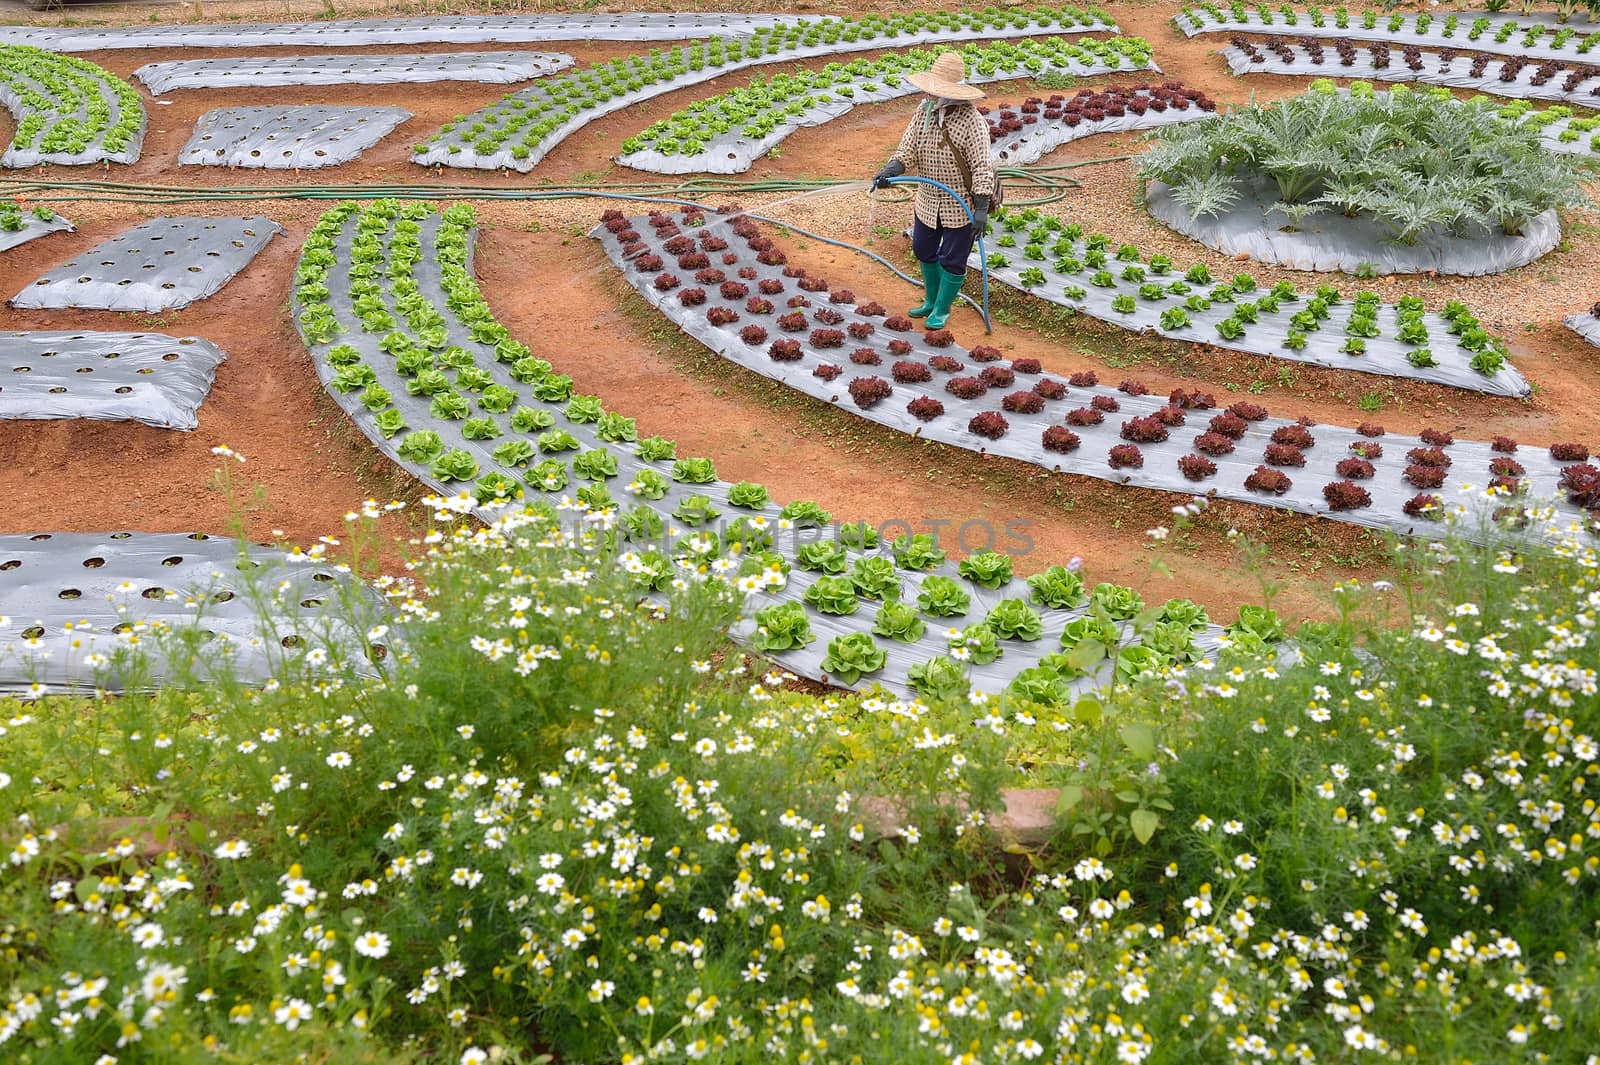 veggie plot in the garden at Doi Angkhang royal project, Chiangm by think4photop